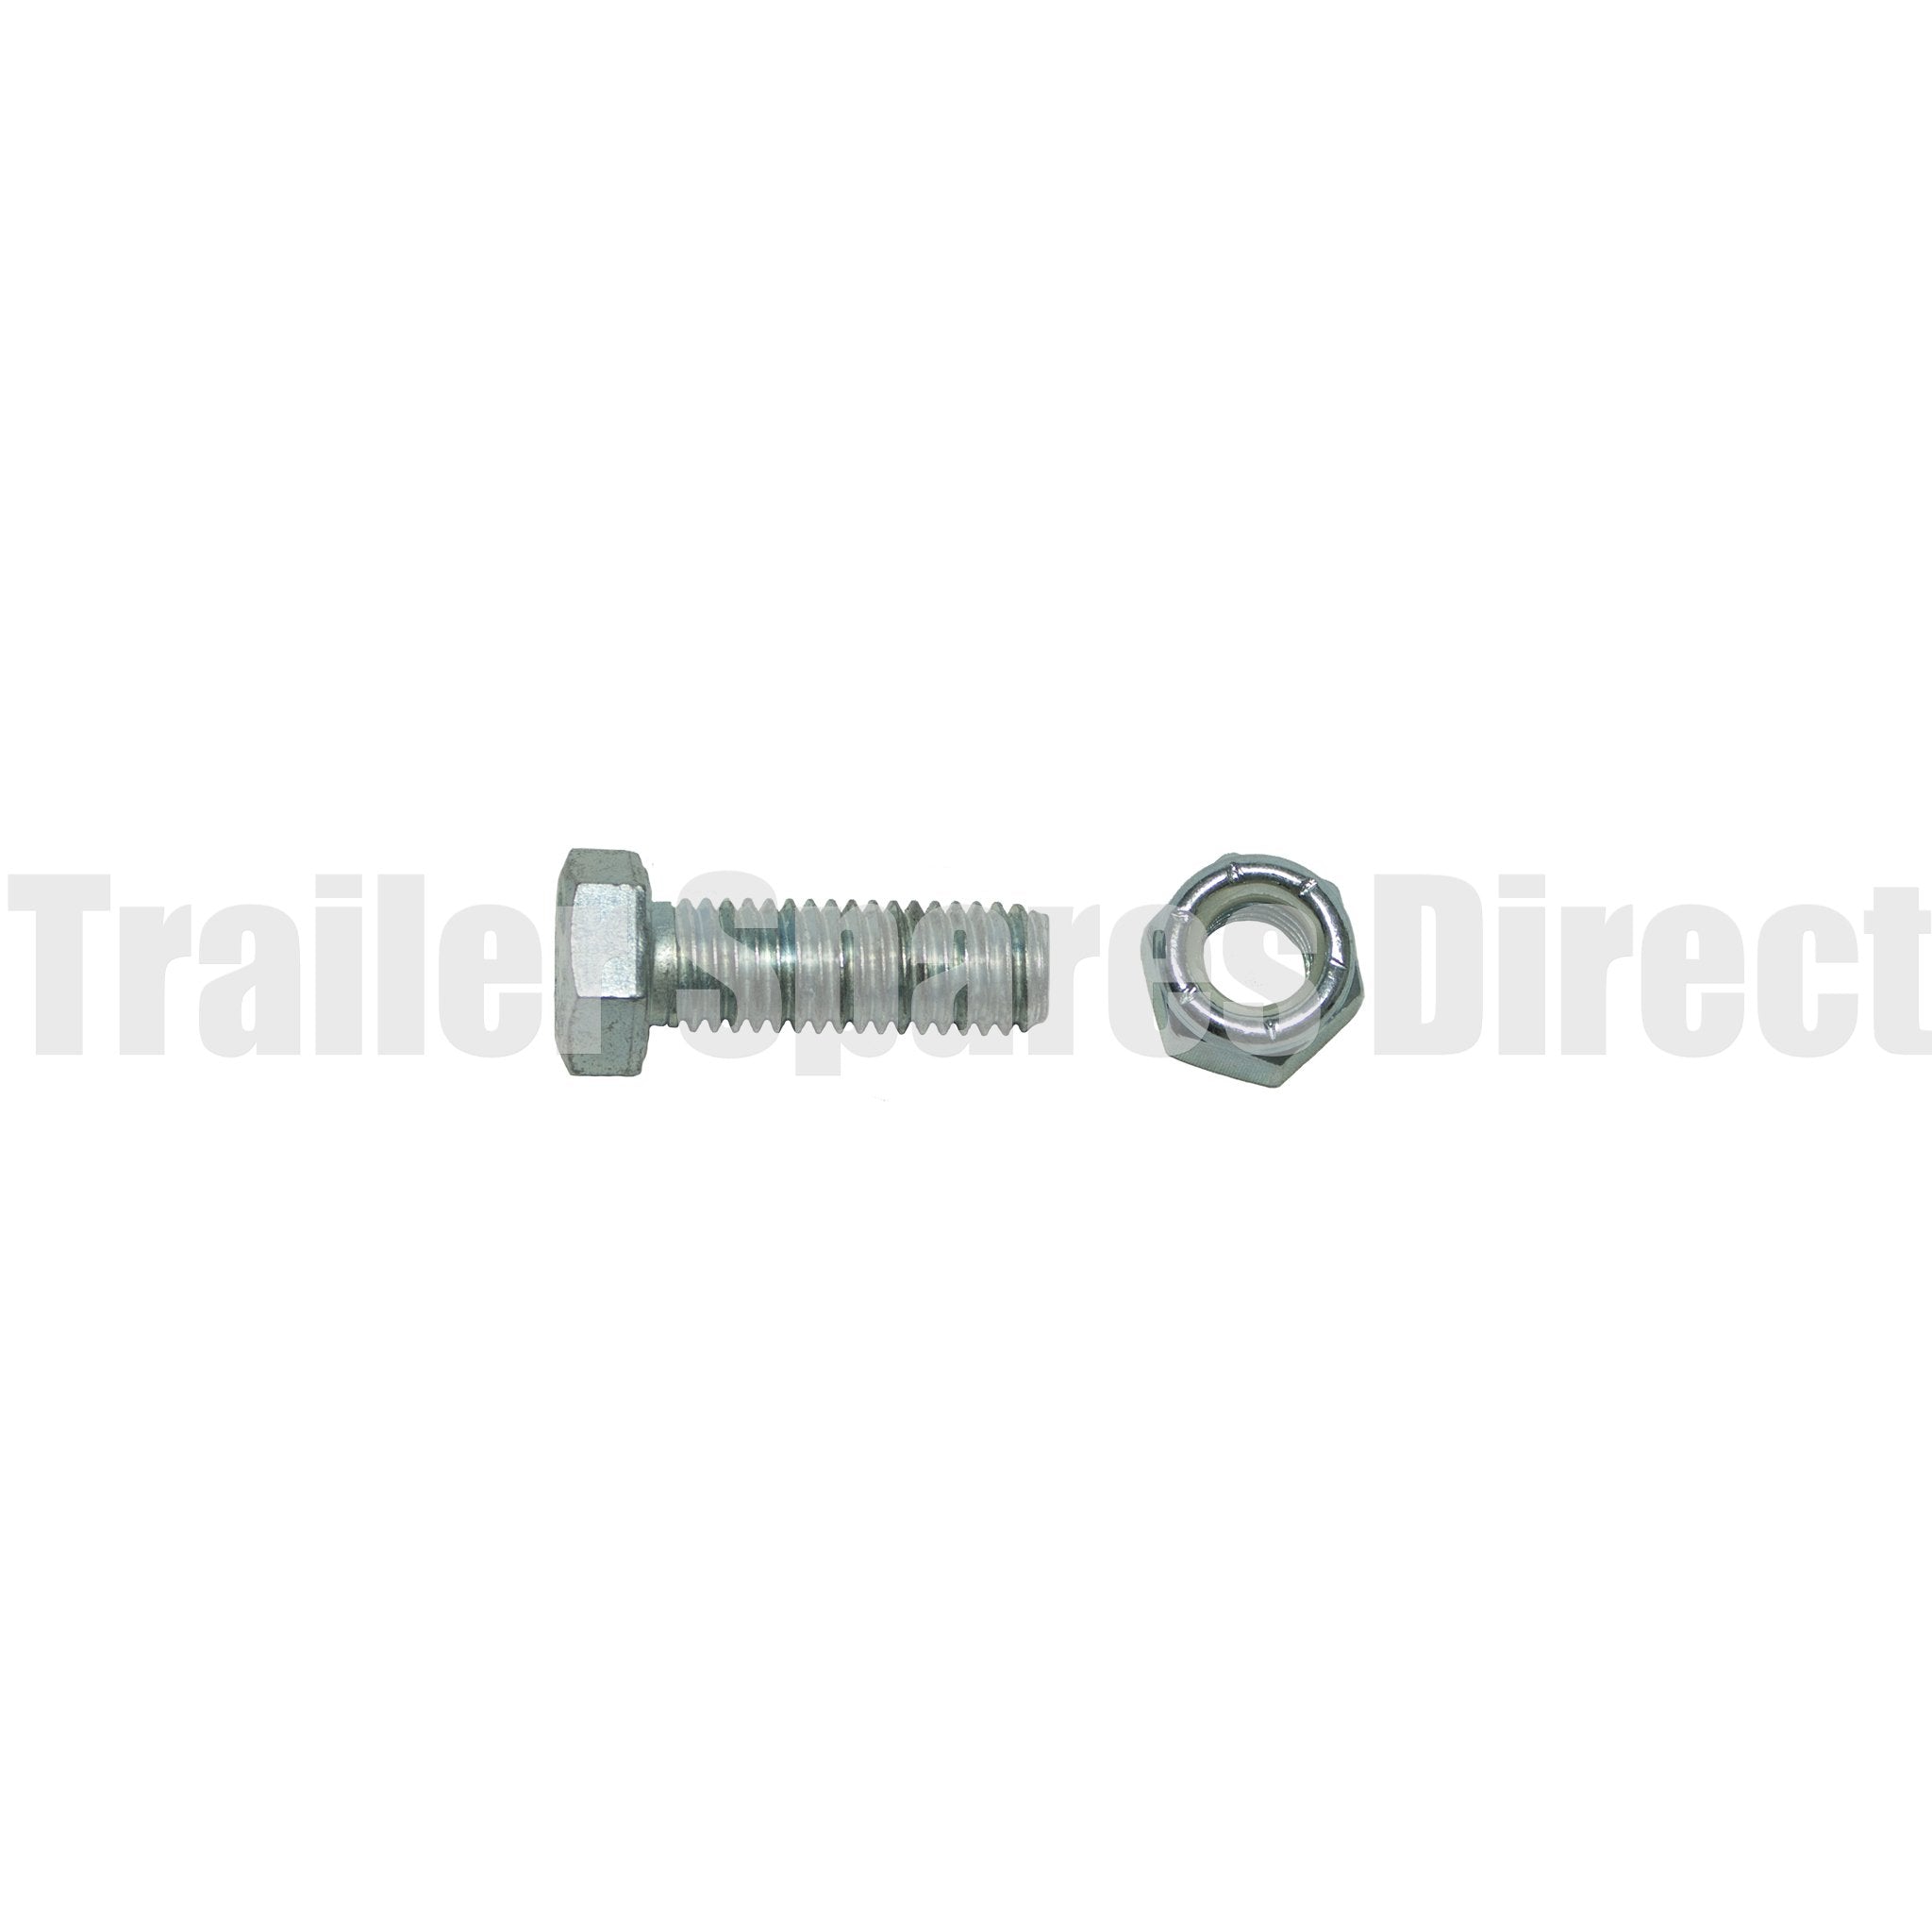 Coupling bolt 1.5 inch